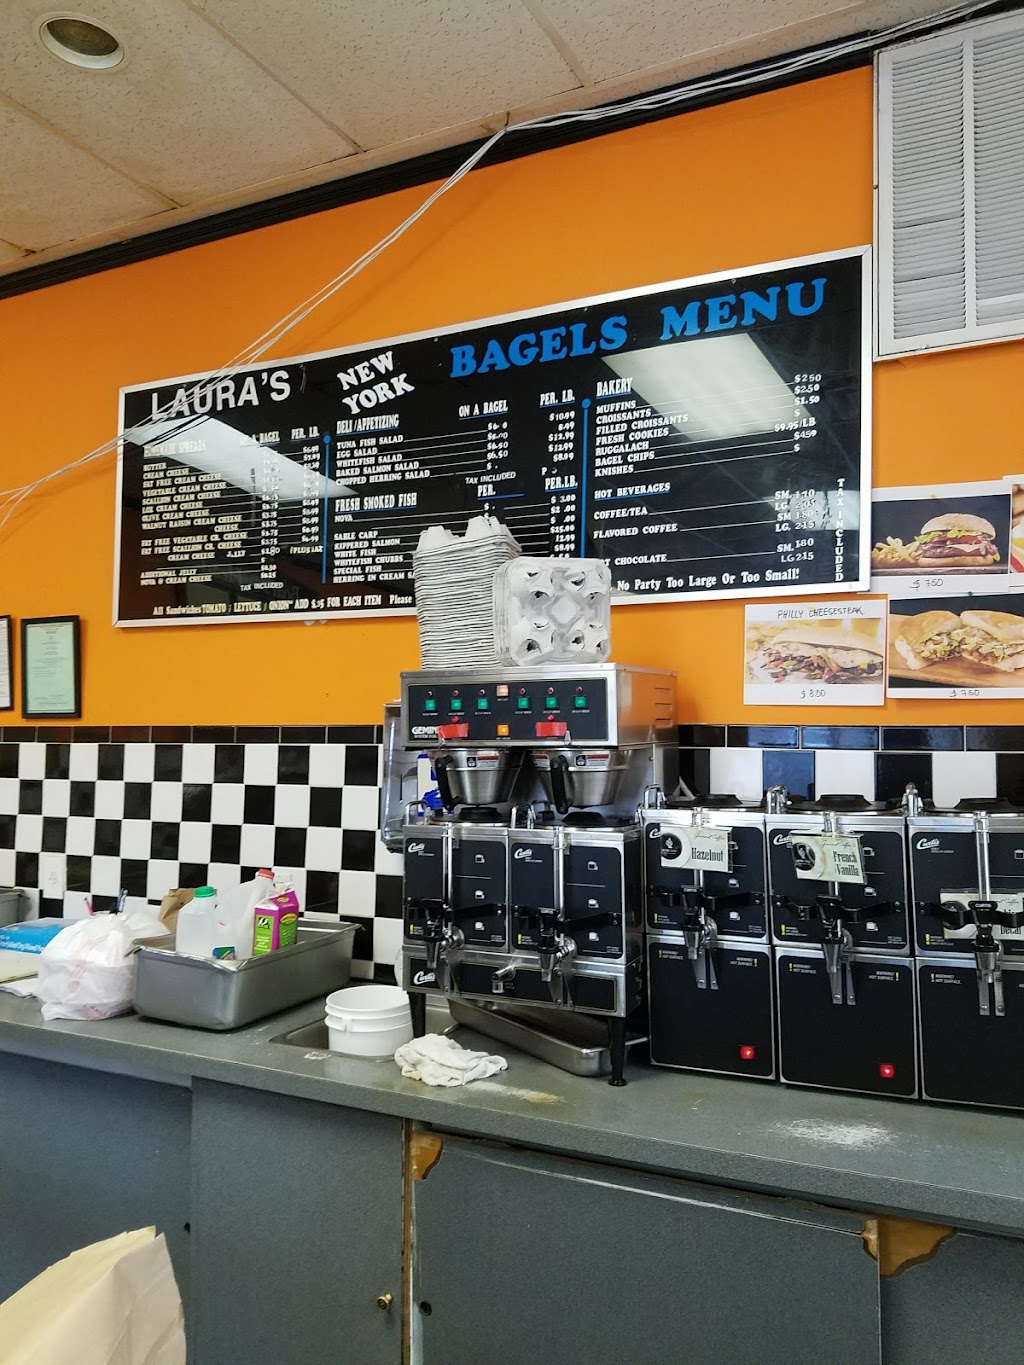 Sammys New York Bagels | 110 Centre Ave, New Rochelle, NY 10805 | Phone: (914) 235-7800